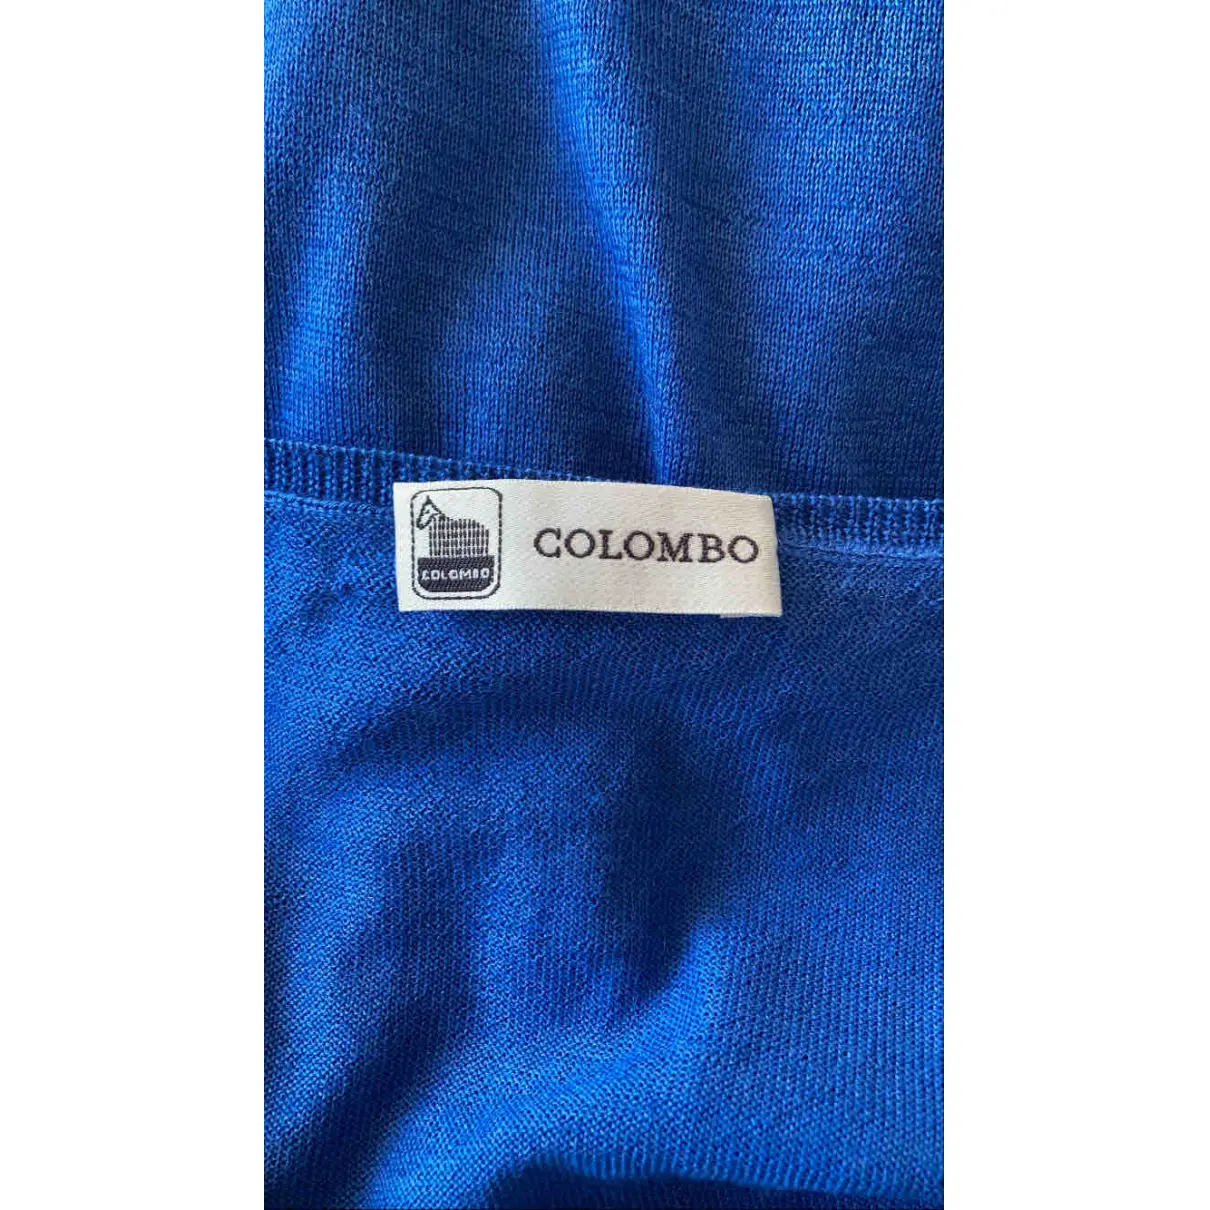 Cashmere top Colombo